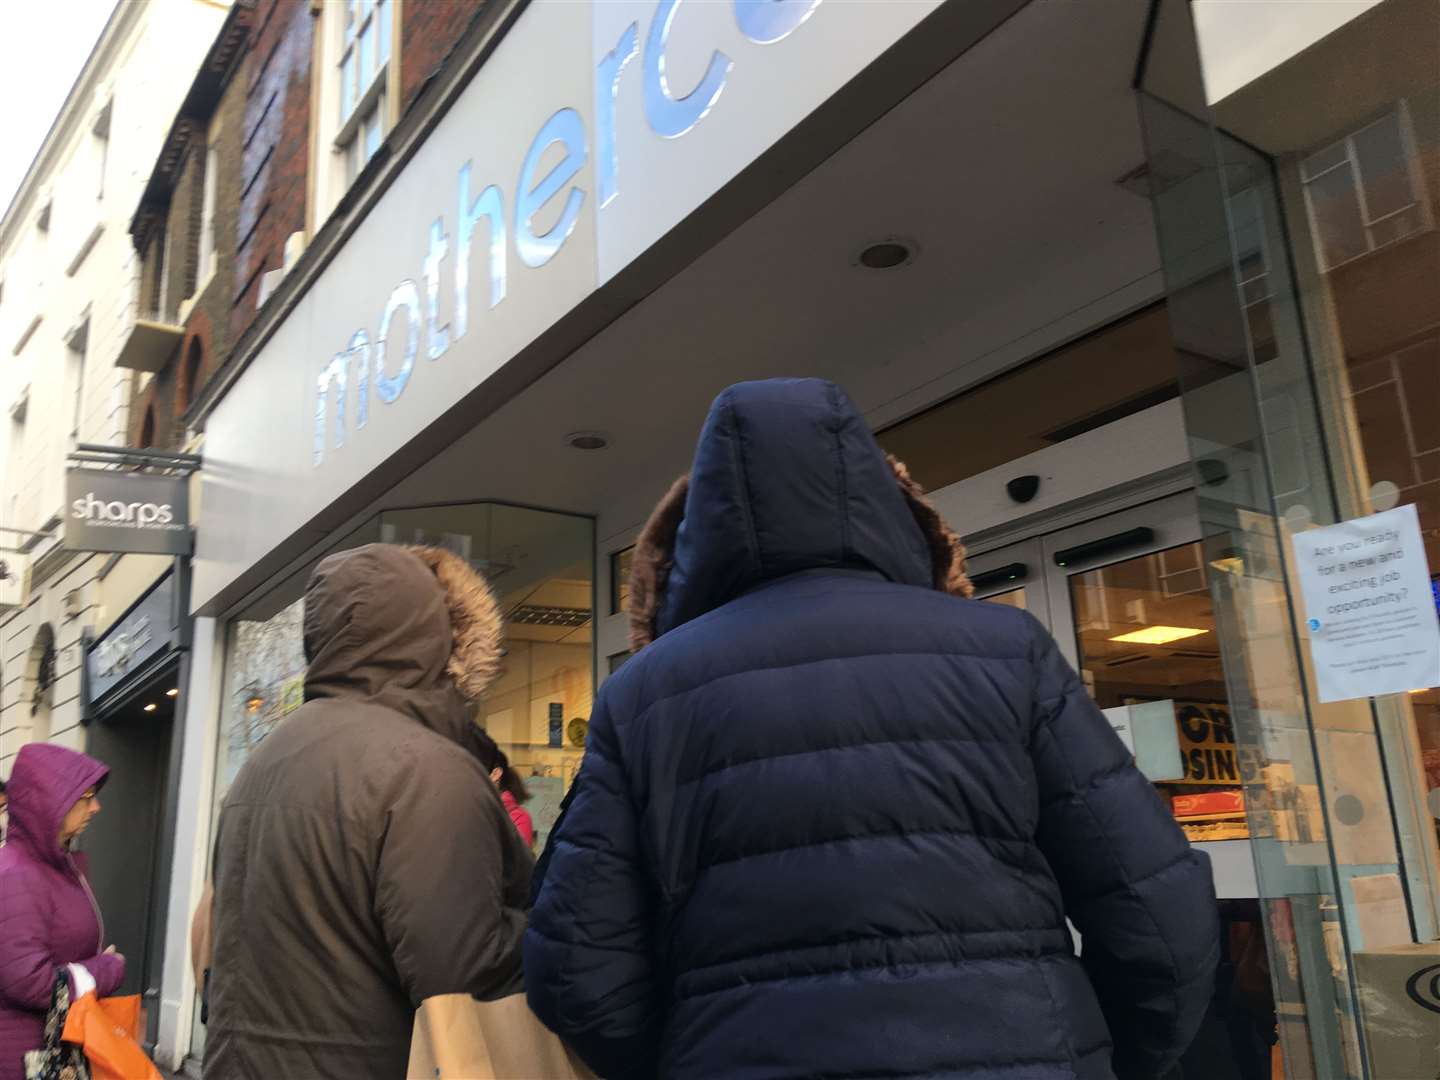 Shoppers outside Mothercare in Maidstone, looking for a bargain before its closure last year